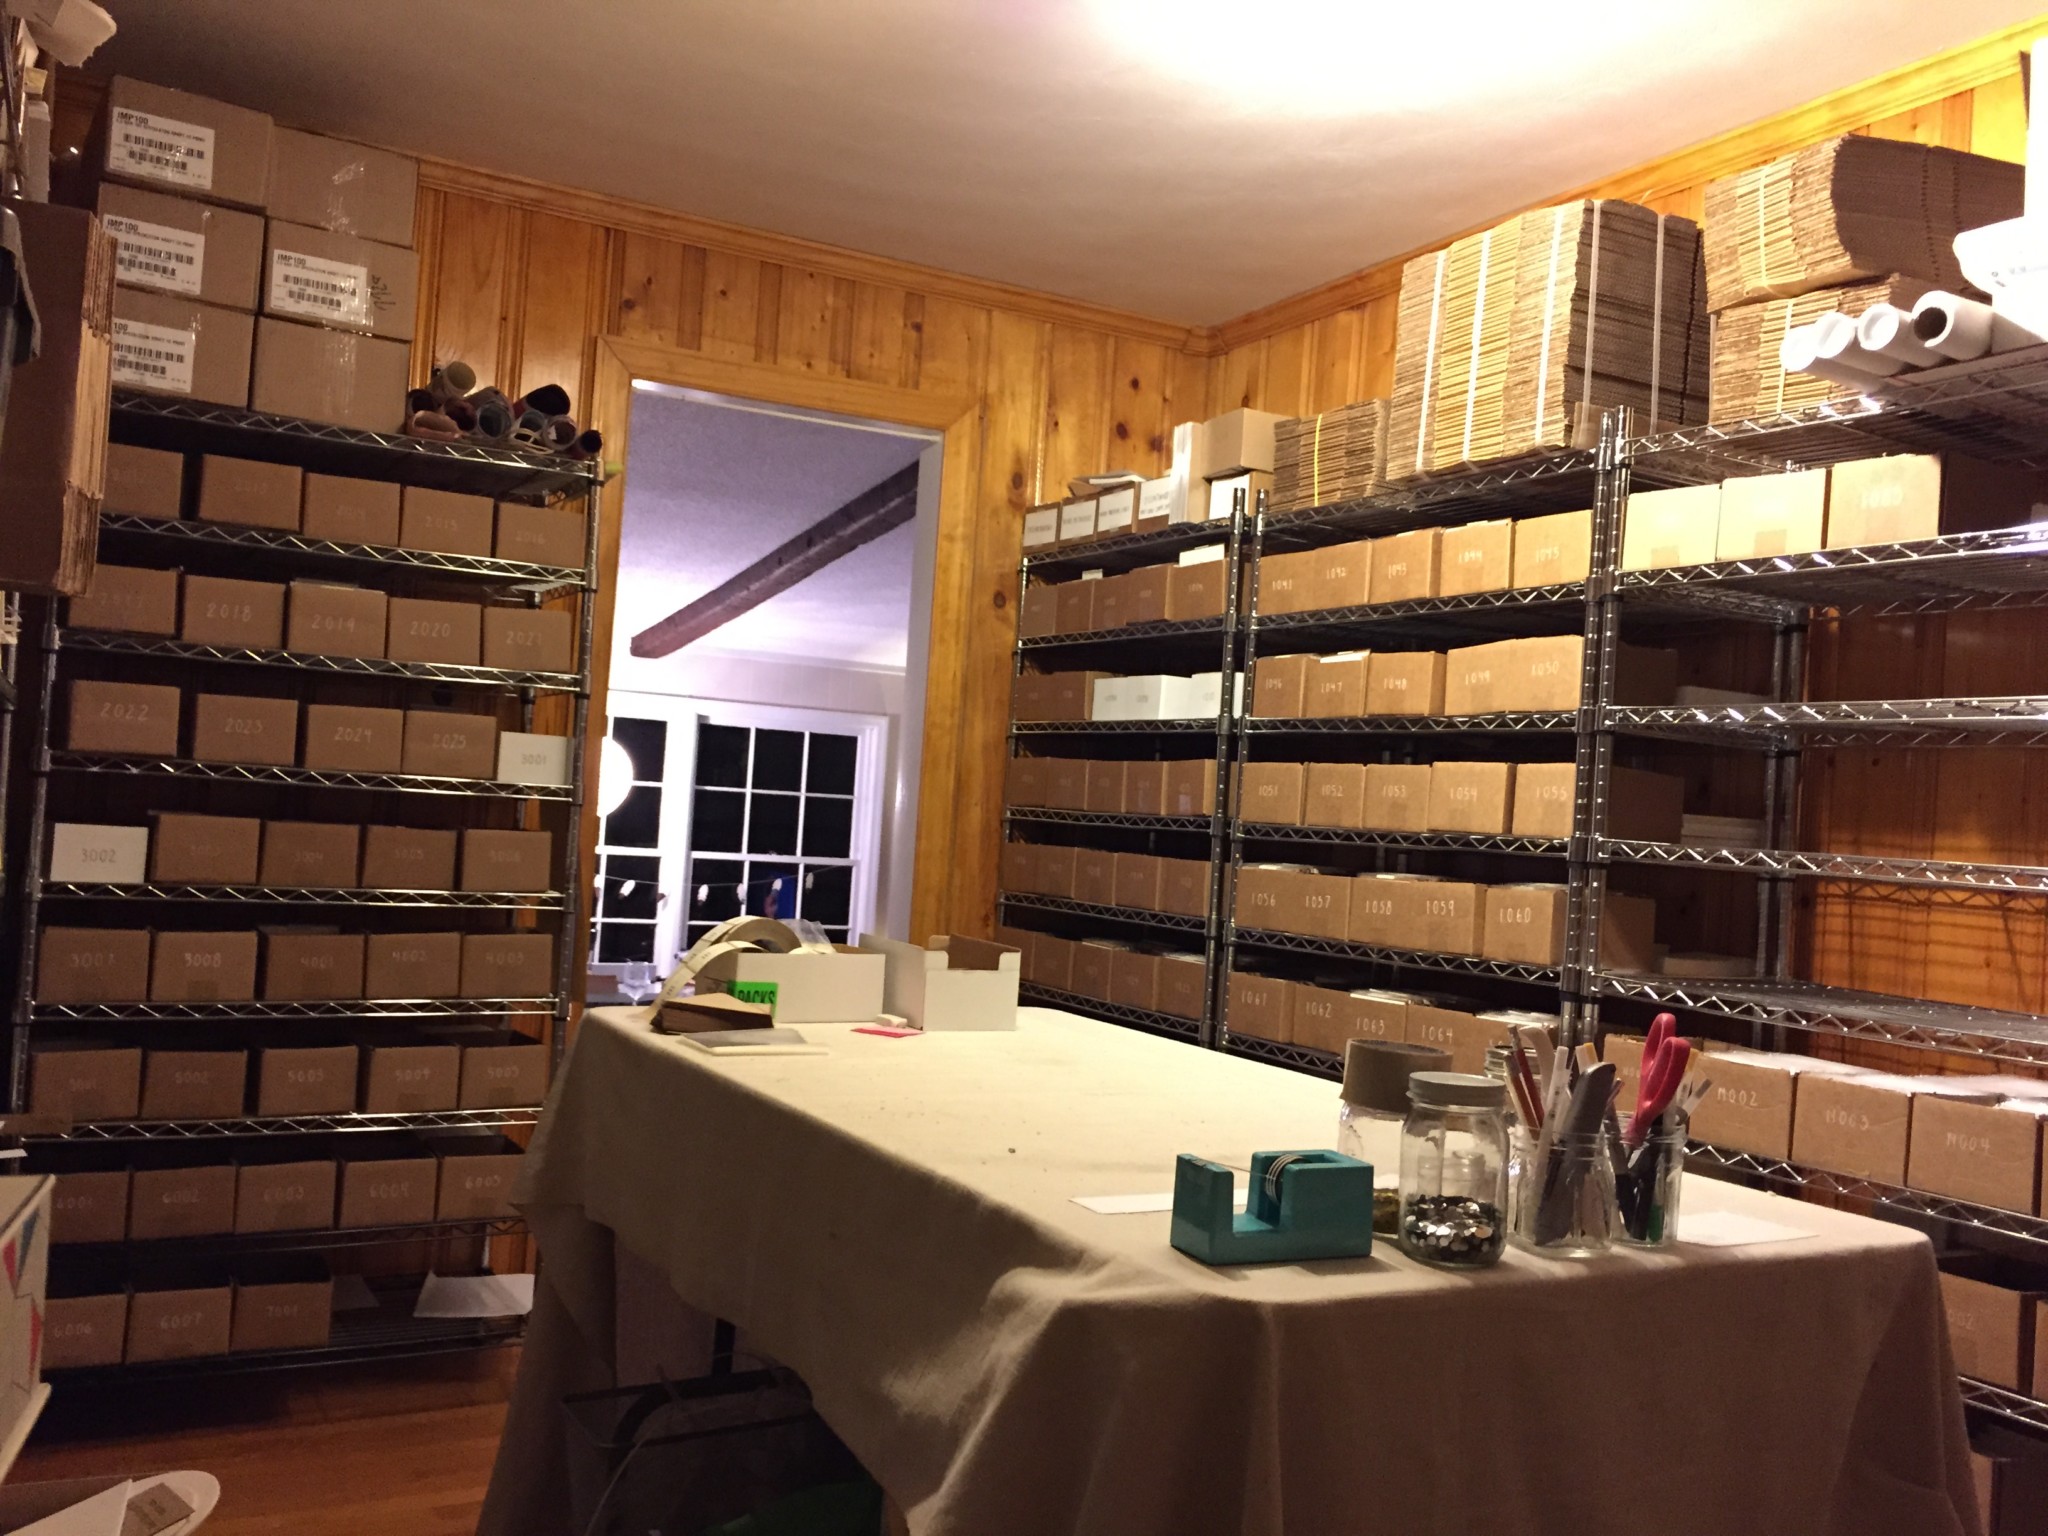 Floor-to-ceiling metal shelves are filled with brown boxes containing greeting card inventory, and a table for assembly sits in the middle of the small room.